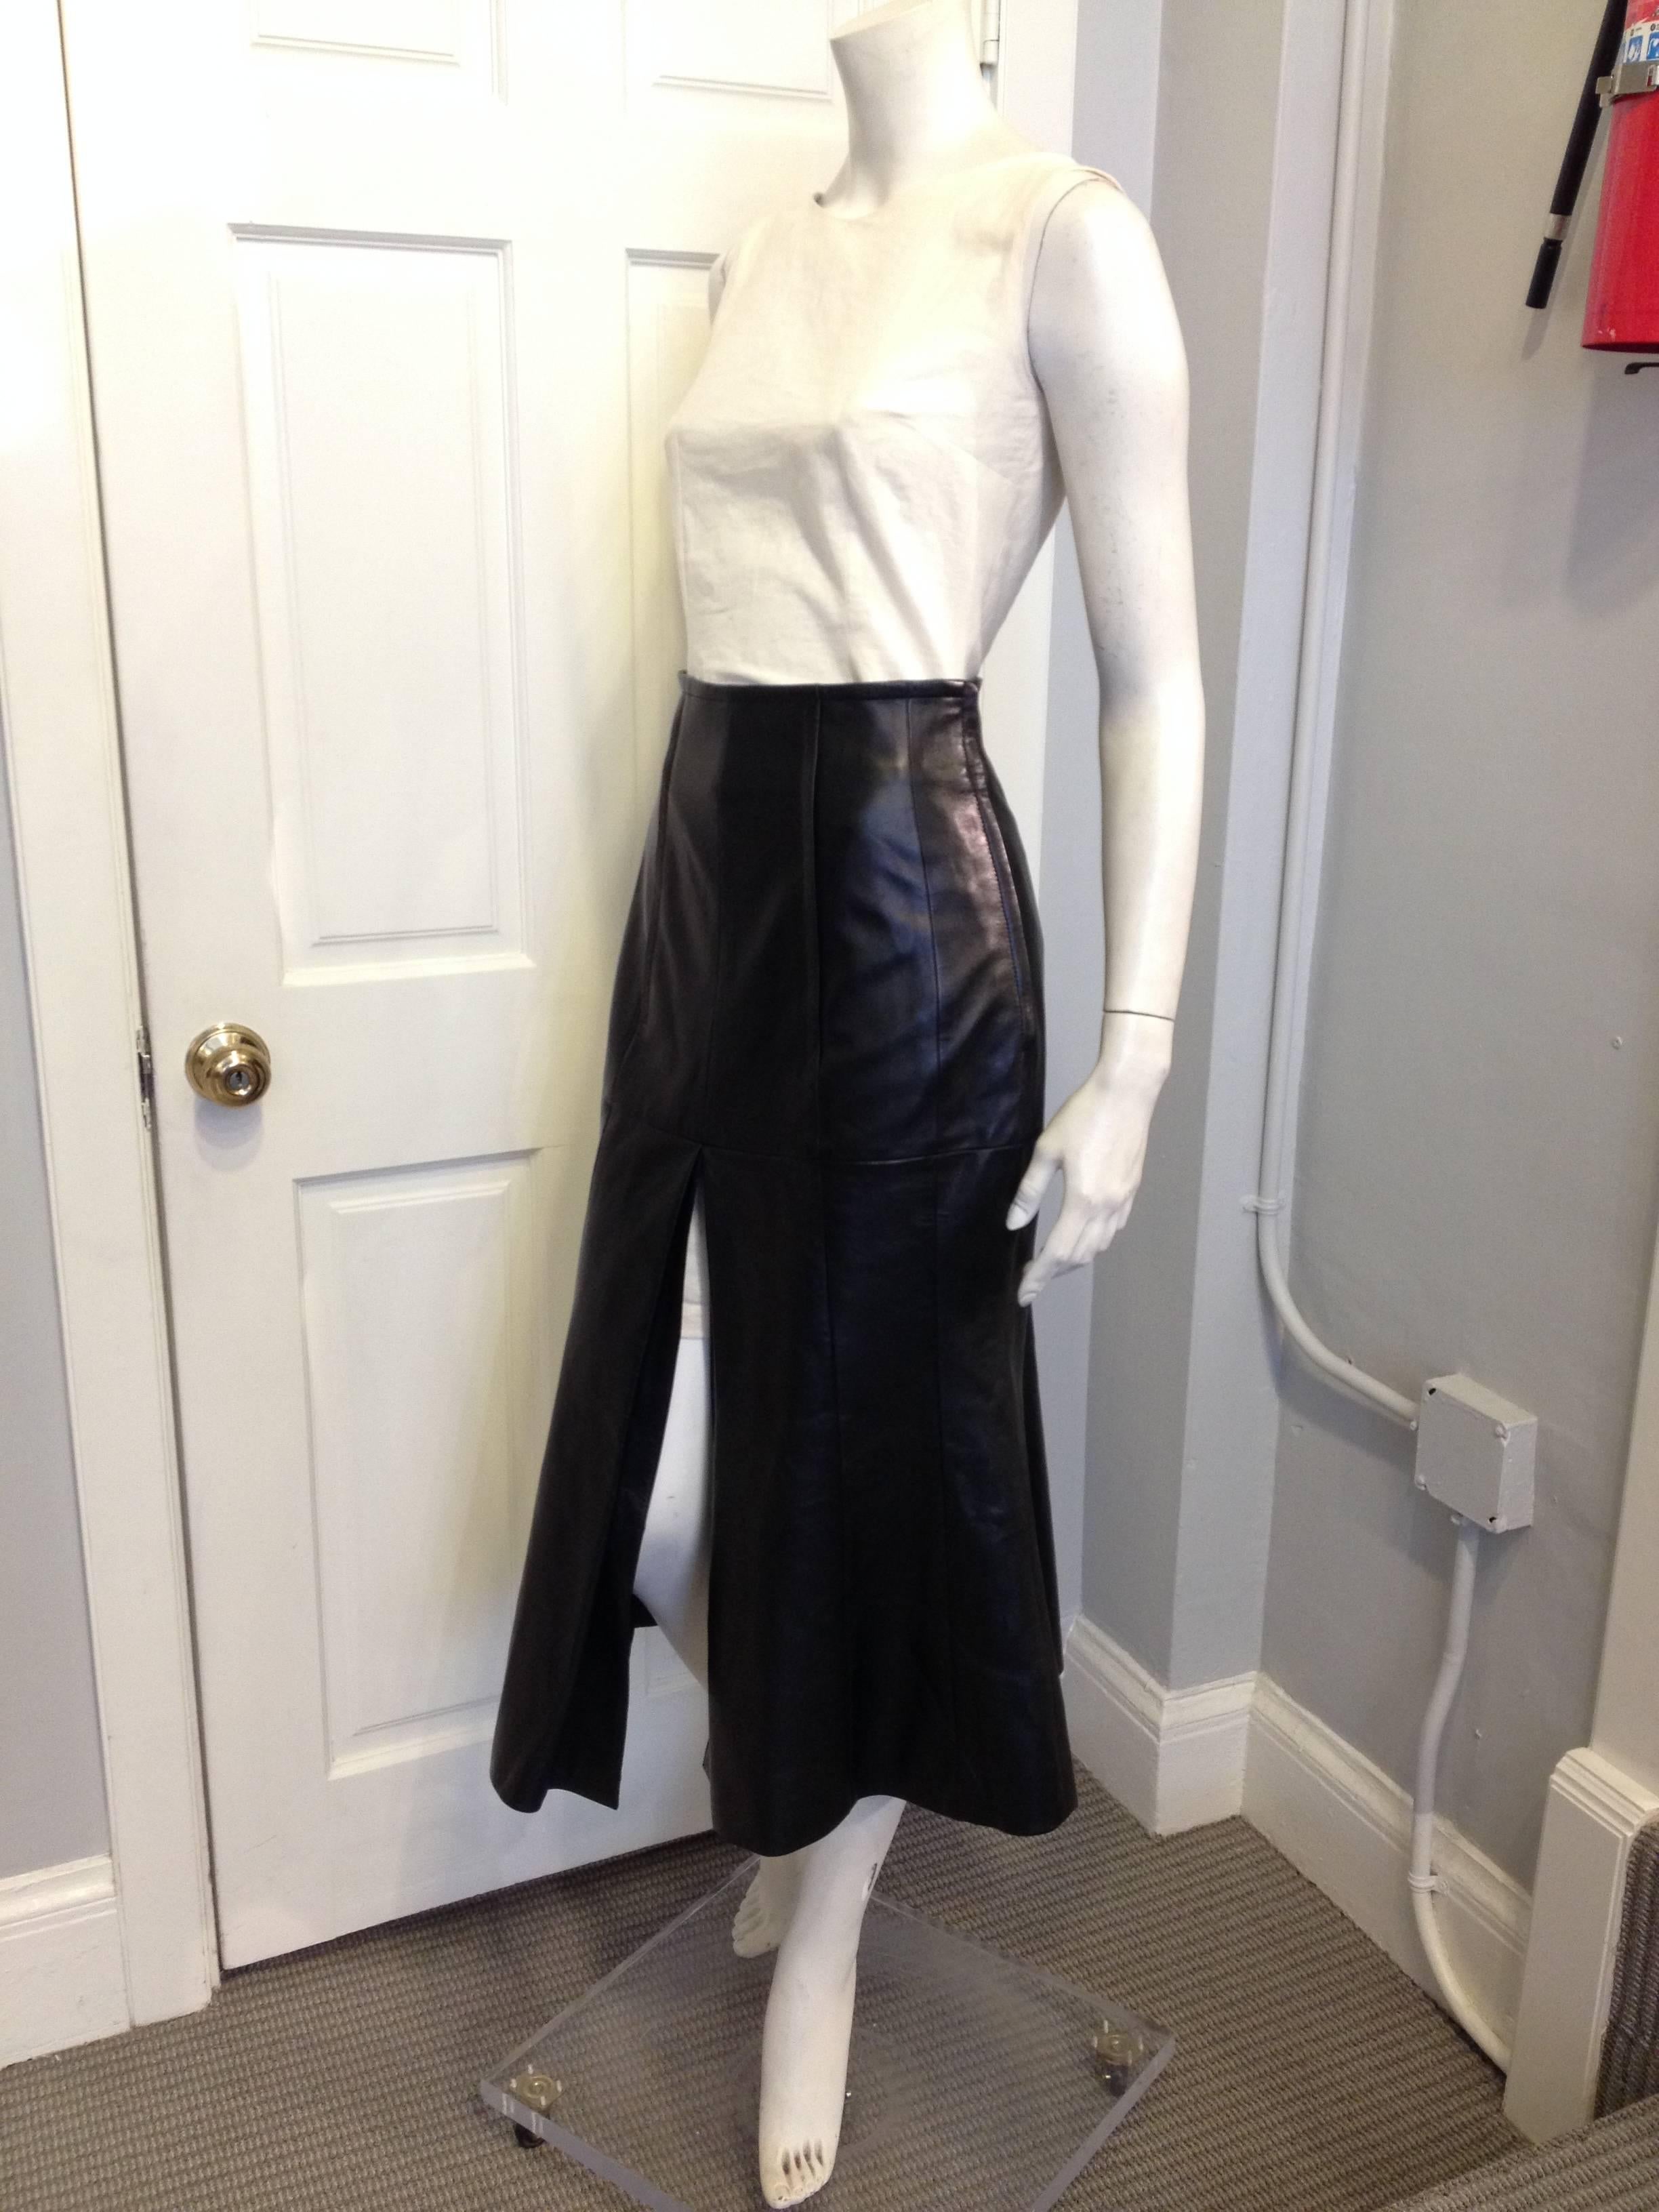 Dramatic, striking, and seductive, this Christian Dior skirt lies at the perfect intersection between an ultra-flattering fit and and cool and contemporary fashion. The high waist and slim hips fit snugly, while the skirt flares out into an angular